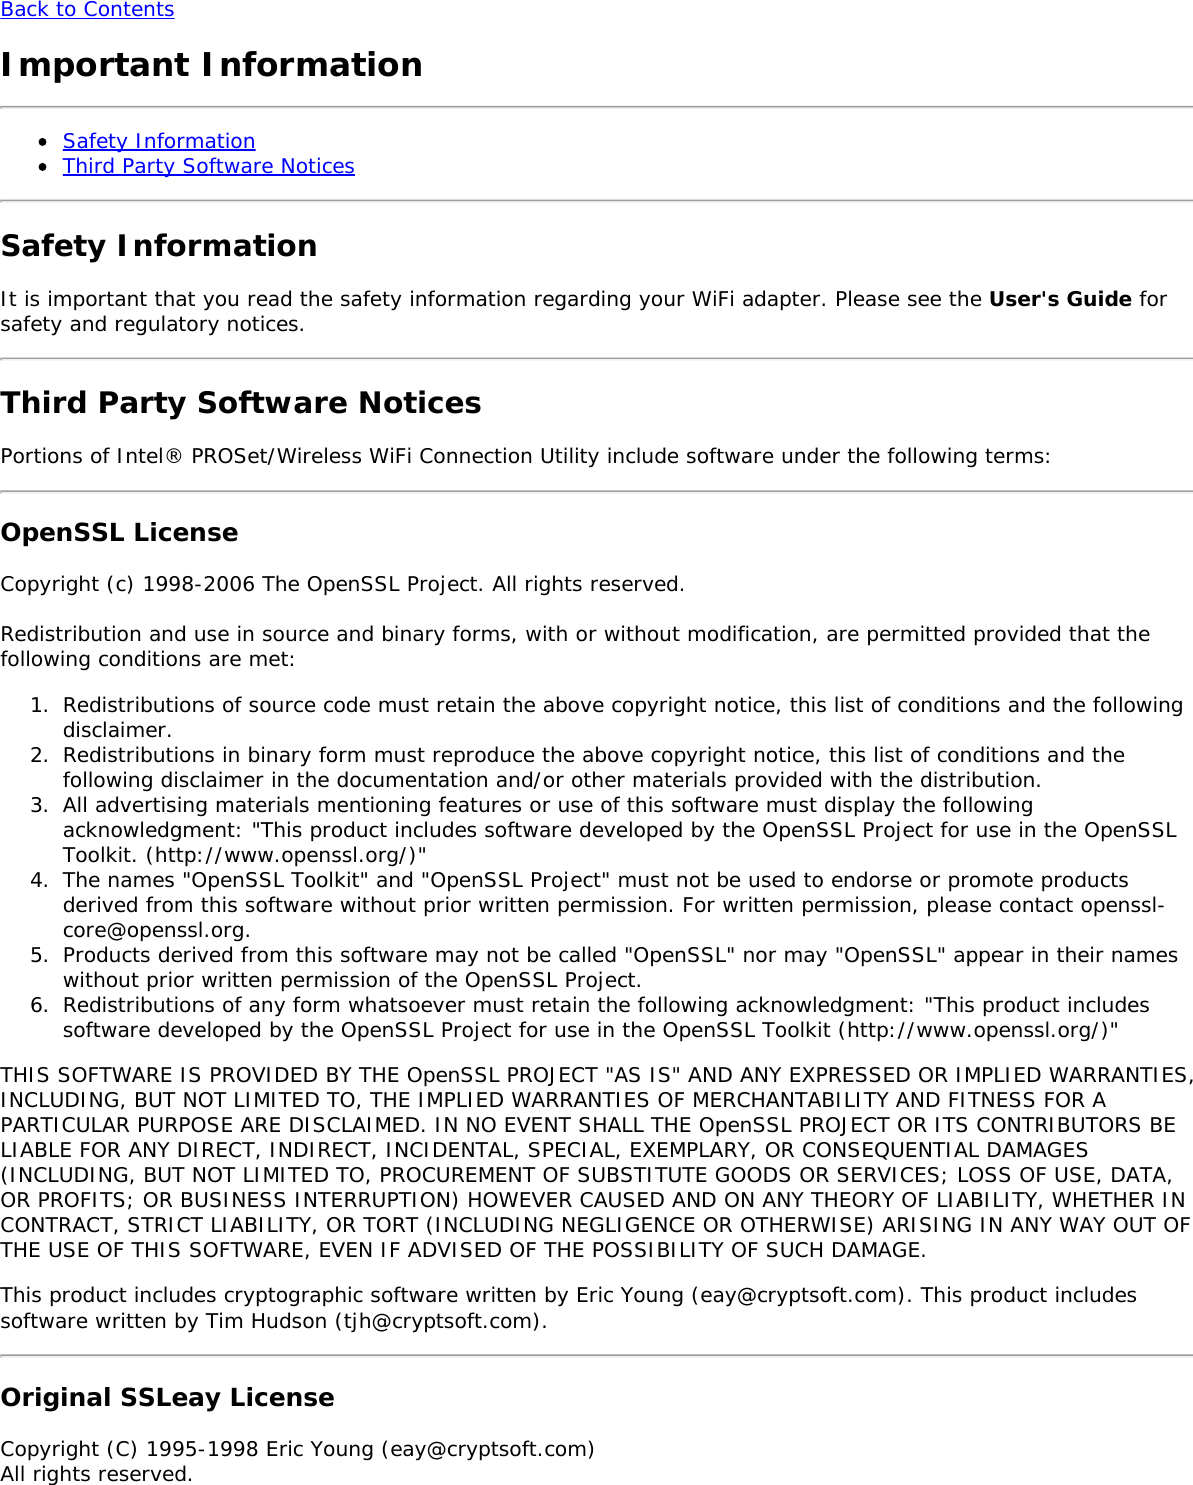 Back to ContentsImportant InformationSafety InformationThird Party Software NoticesSafety InformationIt is important that you read the safety information regarding your WiFi adapter. Please see the User&apos;s Guide forsafety and regulatory notices.Third Party Software NoticesPortions of Intel® PROSet/Wireless WiFi Connection Utility include software under the following terms:OpenSSL LicenseCopyright (c) 1998-2006 The OpenSSL Project. All rights reserved.Redistribution and use in source and binary forms, with or without modification, are permitted provided that thefollowing conditions are met:1.  Redistributions of source code must retain the above copyright notice, this list of conditions and the followingdisclaimer.2.  Redistributions in binary form must reproduce the above copyright notice, this list of conditions and thefollowing disclaimer in the documentation and/or other materials provided with the distribution.3.  All advertising materials mentioning features or use of this software must display the followingacknowledgment: &quot;This product includes software developed by the OpenSSL Project for use in the OpenSSLToolkit. (http://www.openssl.org/)&quot;4.  The names &quot;OpenSSL Toolkit&quot; and &quot;OpenSSL Project&quot; must not be used to endorse or promote productsderived from this software without prior written permission. For written permission, please contact openssl-core@openssl.org.5.  Products derived from this software may not be called &quot;OpenSSL&quot; nor may &quot;OpenSSL&quot; appear in their nameswithout prior written permission of the OpenSSL Project.6.  Redistributions of any form whatsoever must retain the following acknowledgment: &quot;This product includessoftware developed by the OpenSSL Project for use in the OpenSSL Toolkit (http://www.openssl.org/)&quot;THIS SOFTWARE IS PROVIDED BY THE OpenSSL PROJECT &quot;AS IS&quot; AND ANY EXPRESSED OR IMPLIED WARRANTIES,INCLUDING, BUT NOT LIMITED TO, THE IMPLIED WARRANTIES OF MERCHANTABILITY AND FITNESS FOR APARTICULAR PURPOSE ARE DISCLAIMED. IN NO EVENT SHALL THE OpenSSL PROJECT OR ITS CONTRIBUTORS BELIABLE FOR ANY DIRECT, INDIRECT, INCIDENTAL, SPECIAL, EXEMPLARY, OR CONSEQUENTIAL DAMAGES(INCLUDING, BUT NOT LIMITED TO, PROCUREMENT OF SUBSTITUTE GOODS OR SERVICES; LOSS OF USE, DATA,OR PROFITS; OR BUSINESS INTERRUPTION) HOWEVER CAUSED AND ON ANY THEORY OF LIABILITY, WHETHER INCONTRACT, STRICT LIABILITY, OR TORT (INCLUDING NEGLIGENCE OR OTHERWISE) ARISING IN ANY WAY OUT OFTHE USE OF THIS SOFTWARE, EVEN IF ADVISED OF THE POSSIBILITY OF SUCH DAMAGE.This product includes cryptographic software written by Eric Young (eay@cryptsoft.com). This product includessoftware written by Tim Hudson (tjh@cryptsoft.com).Original SSLeay LicenseCopyright (C) 1995-1998 Eric Young (eay@cryptsoft.com)All rights reserved.